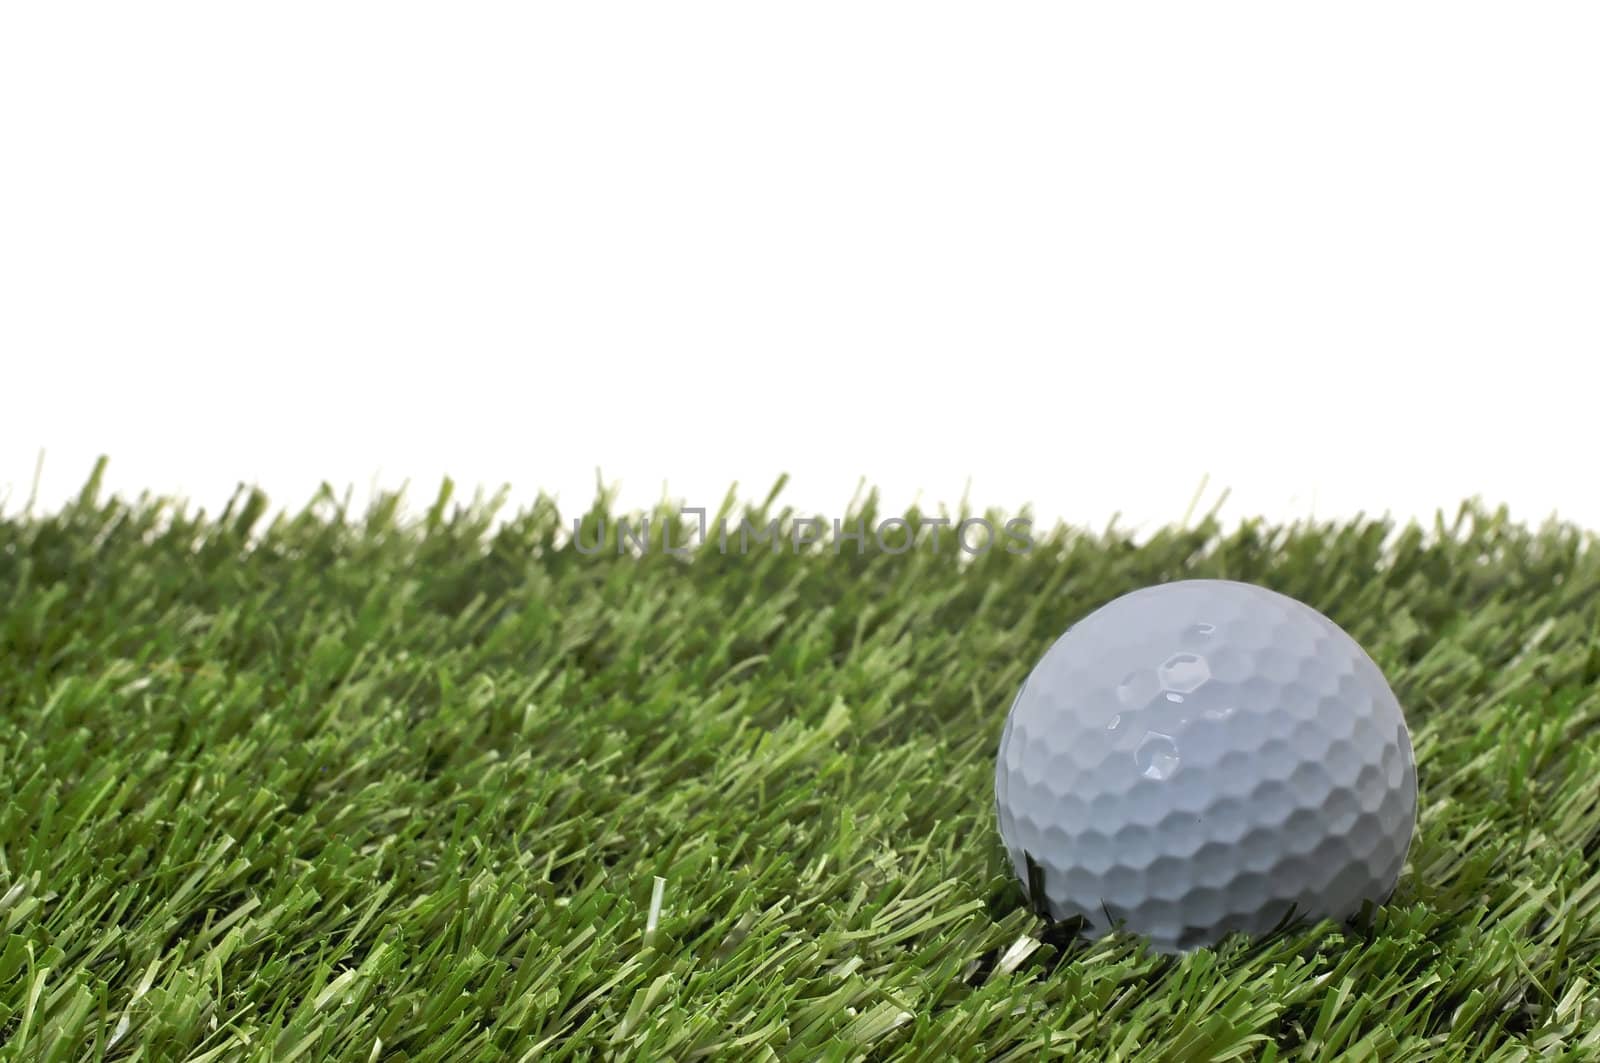 Closeup of golf ball  on grass with white background.